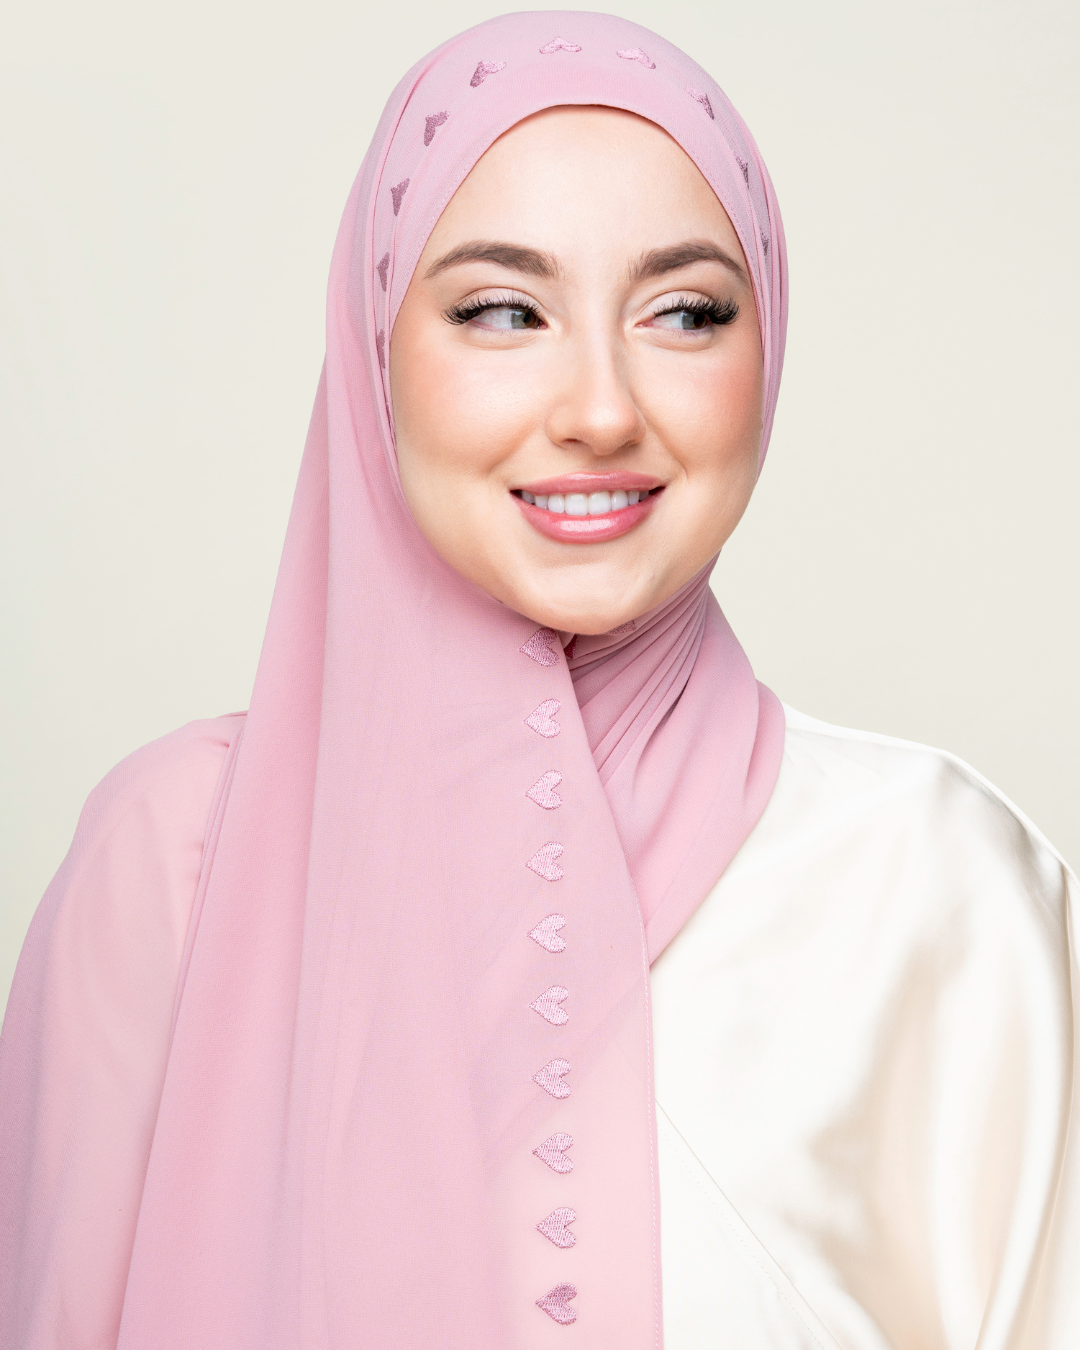 Embroidered Hijab - Pink Hearts